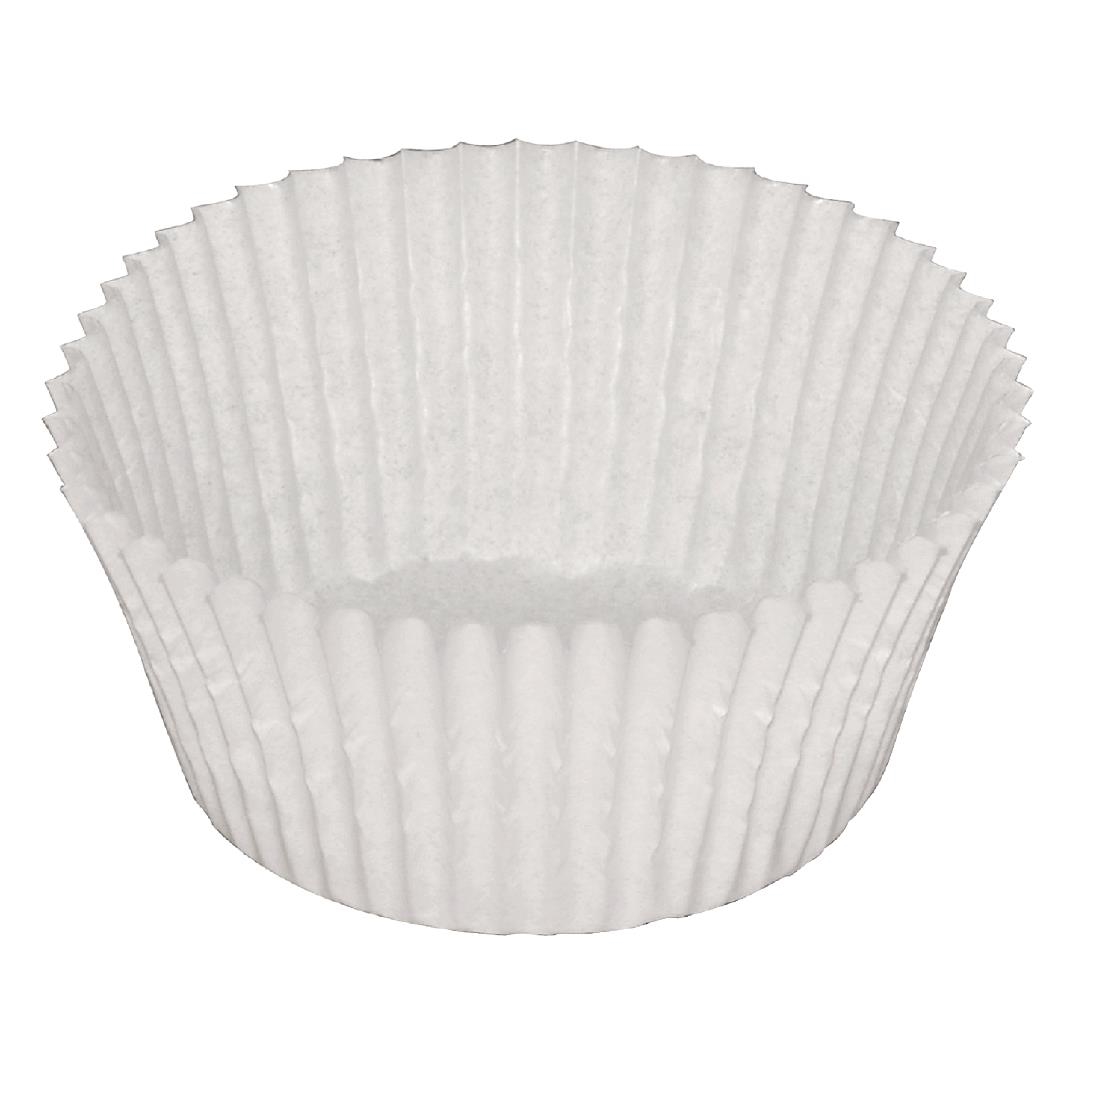 Fiesta Cup Cake Cases 75mm (Pack of 1000)